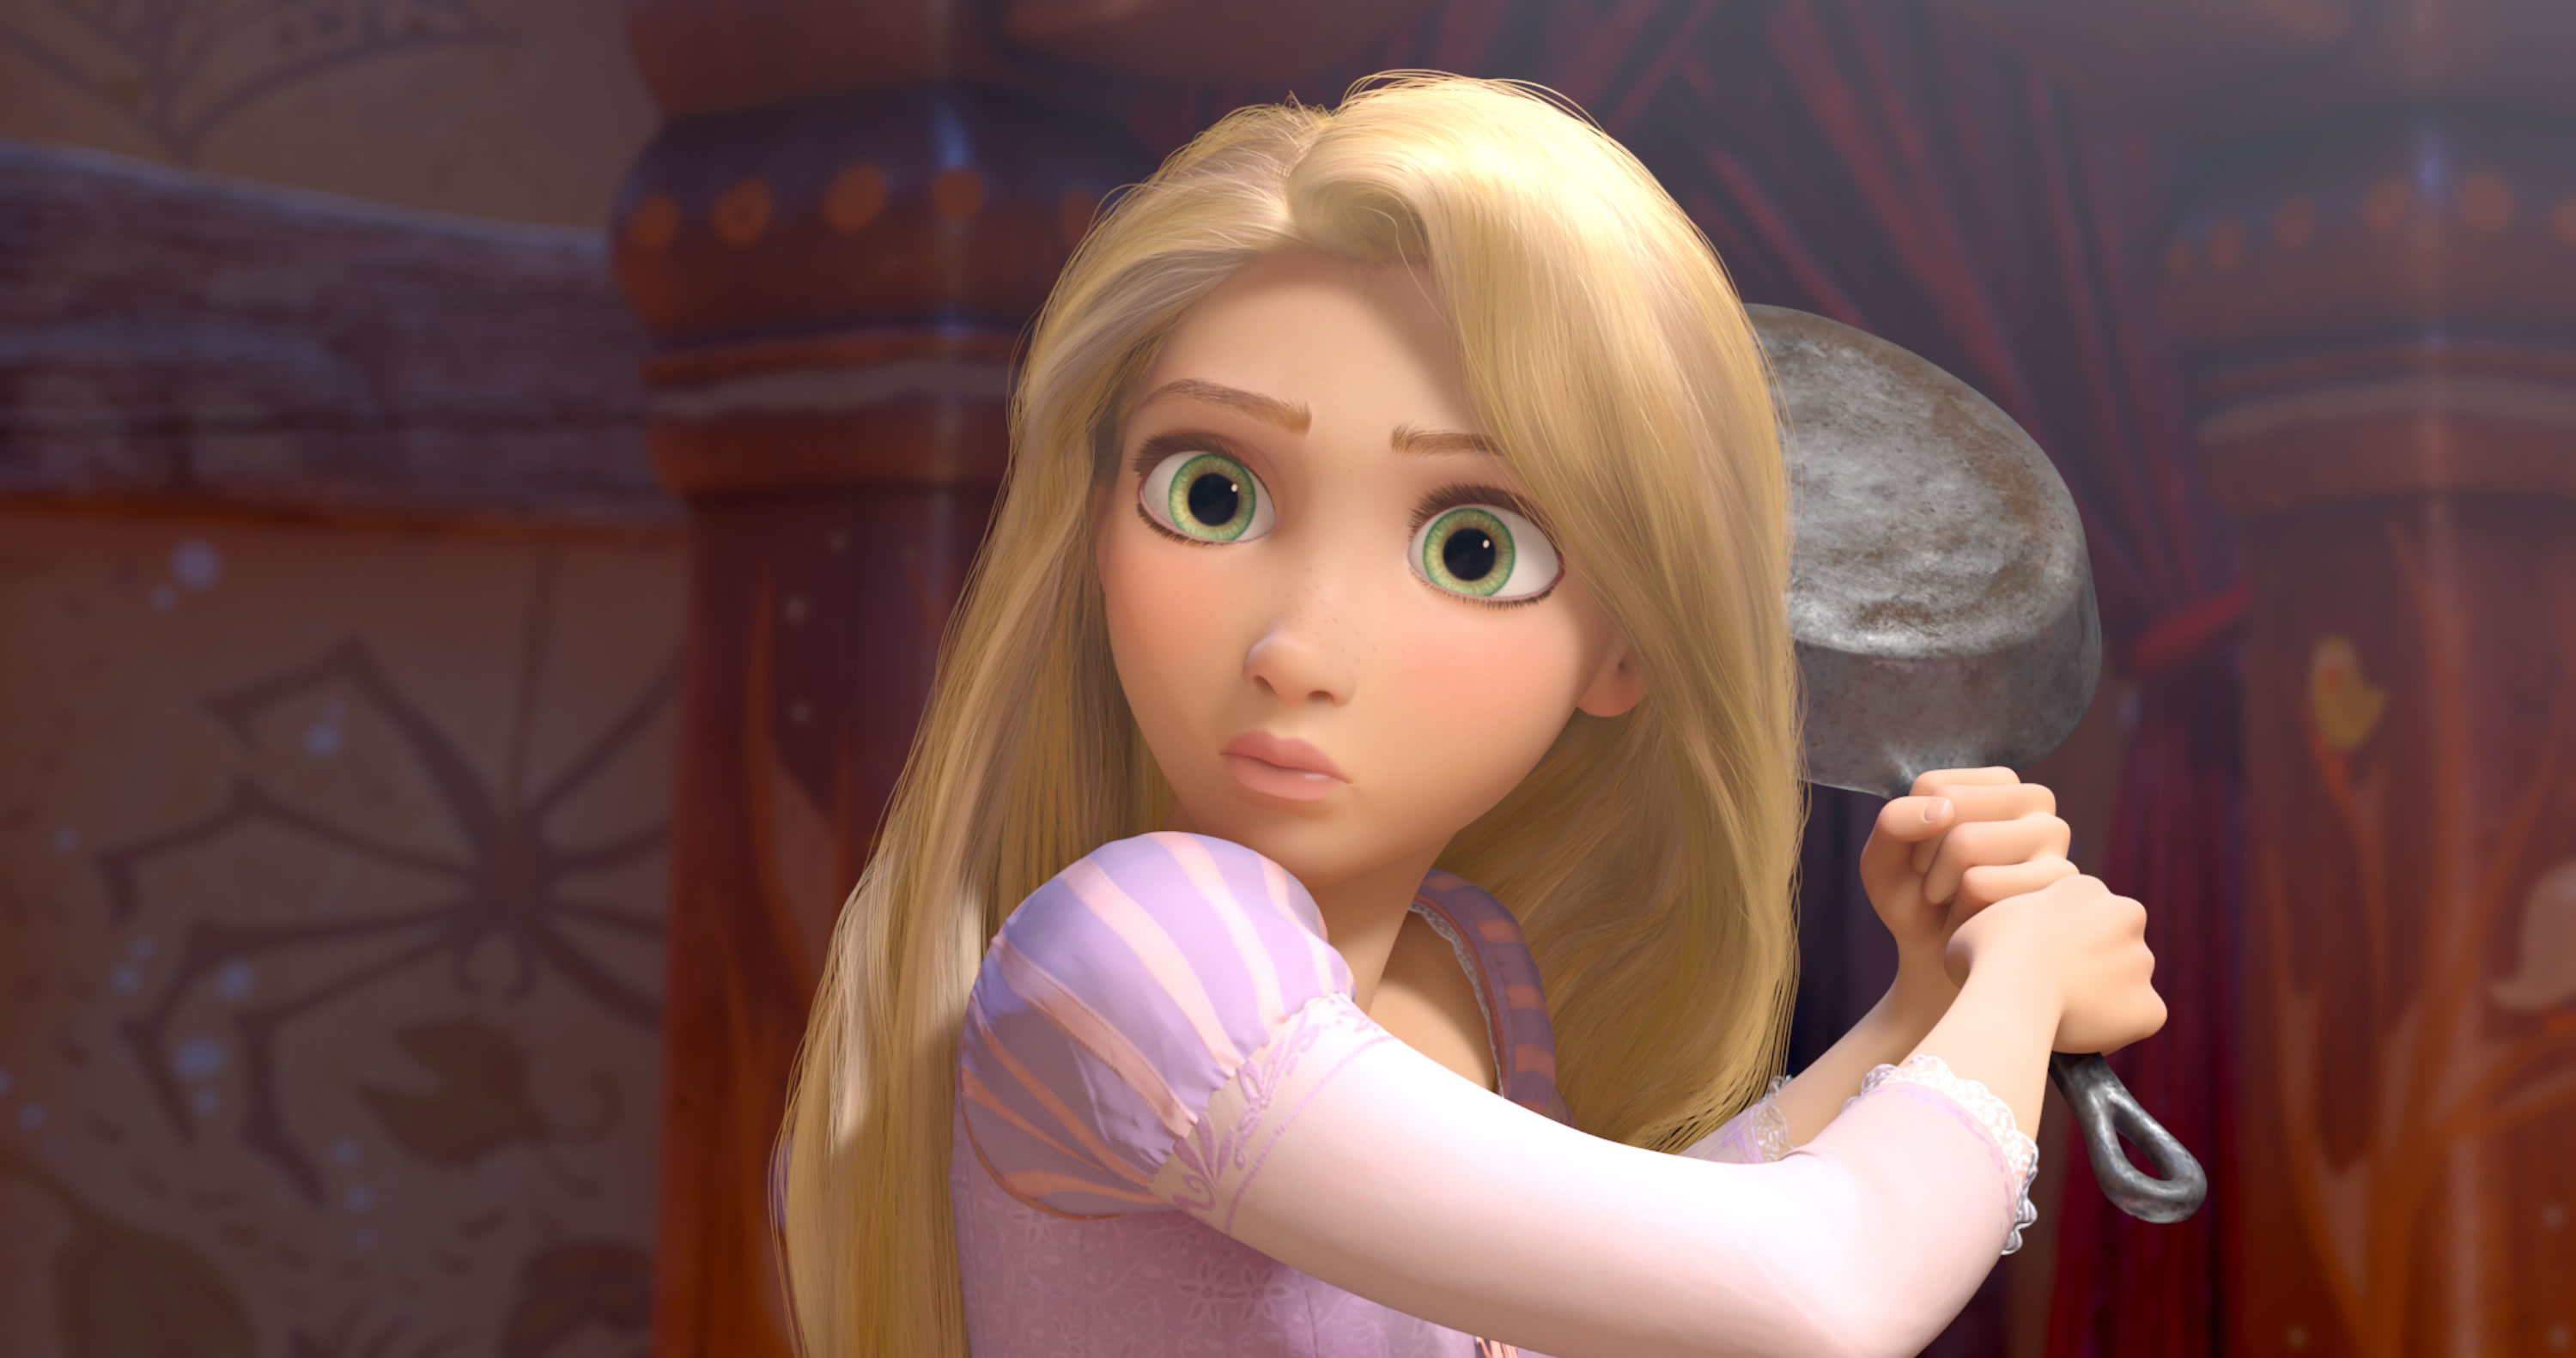 Rapunzel holding a fry-pan to hit someone